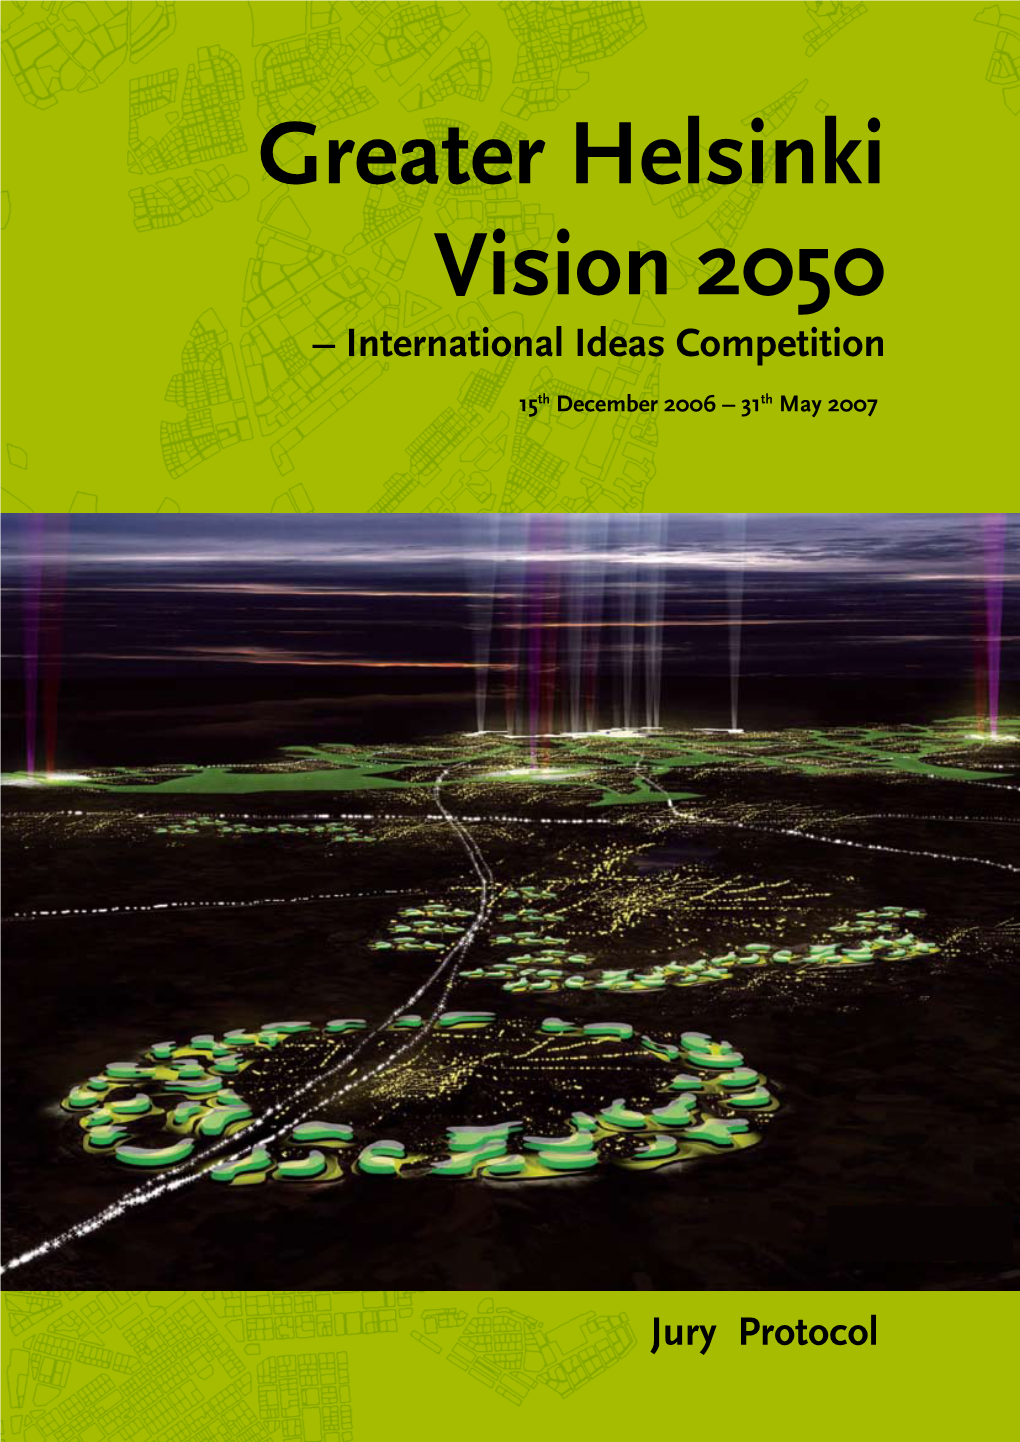 Greater Helsinki Vision 2050 – International Ideas Competition